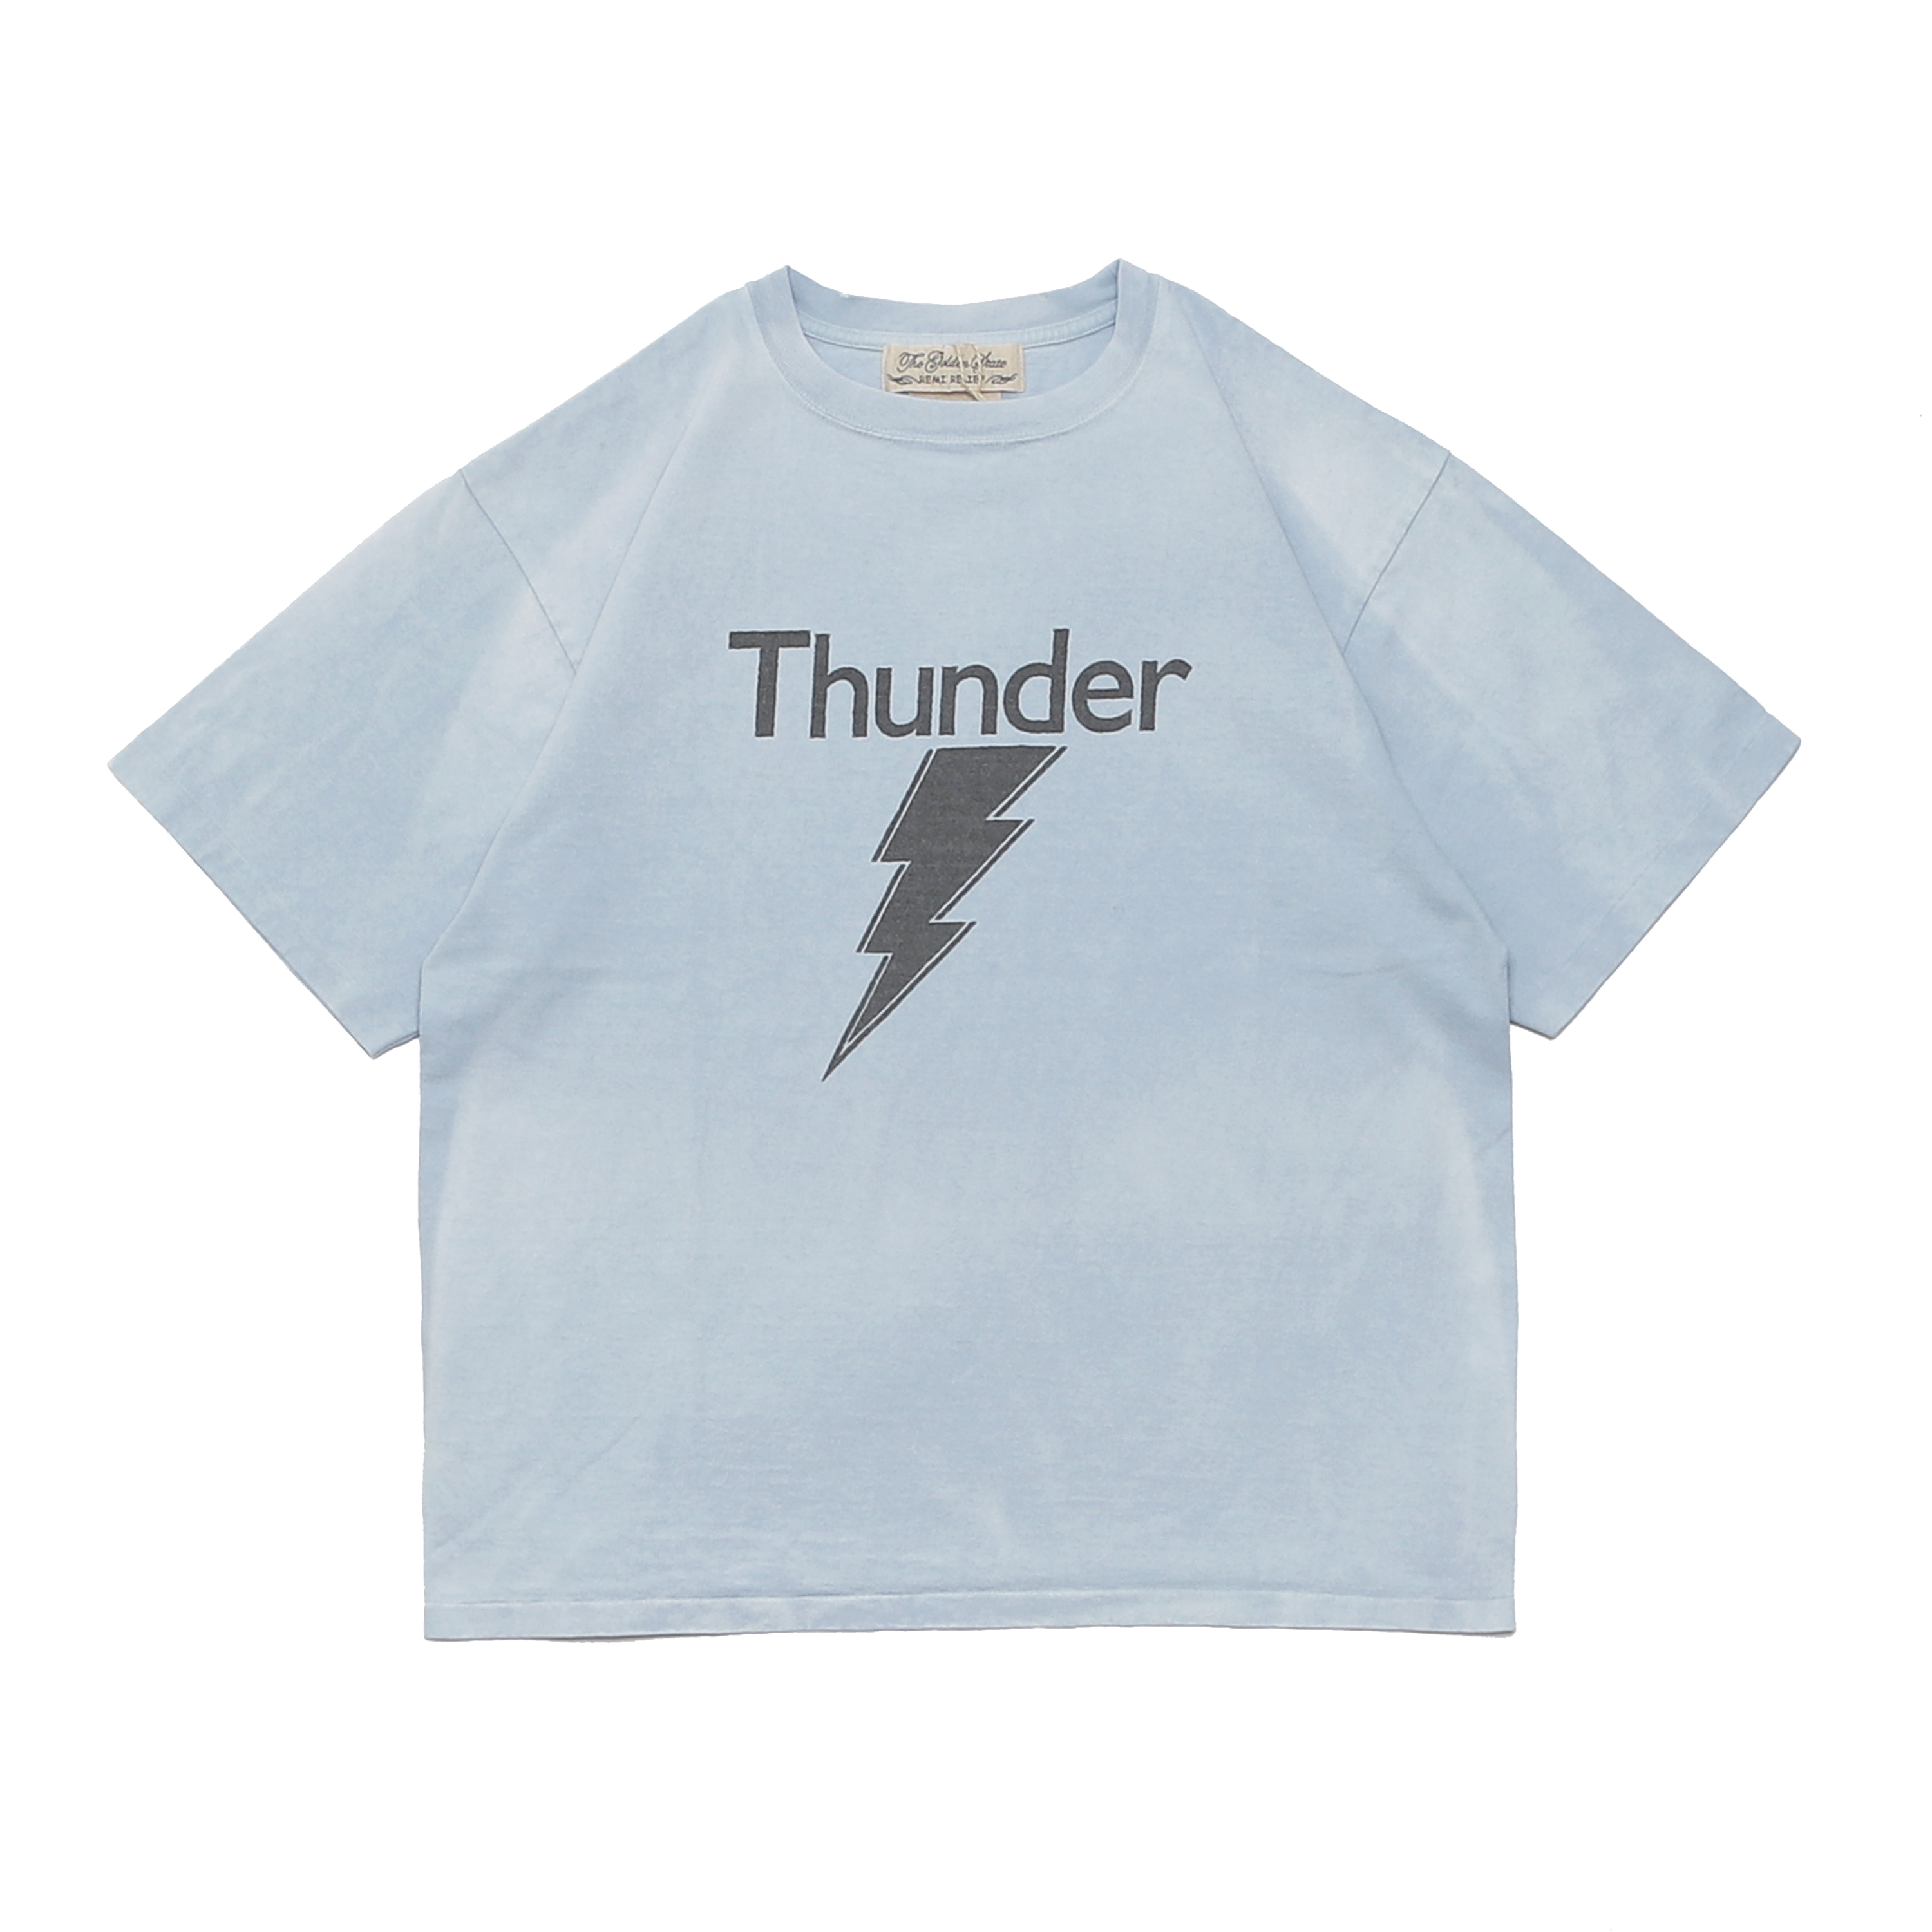 SIDE SEAMLESS JERSEY S/S TEE WITH NEW FINISH - THUNDER SAX